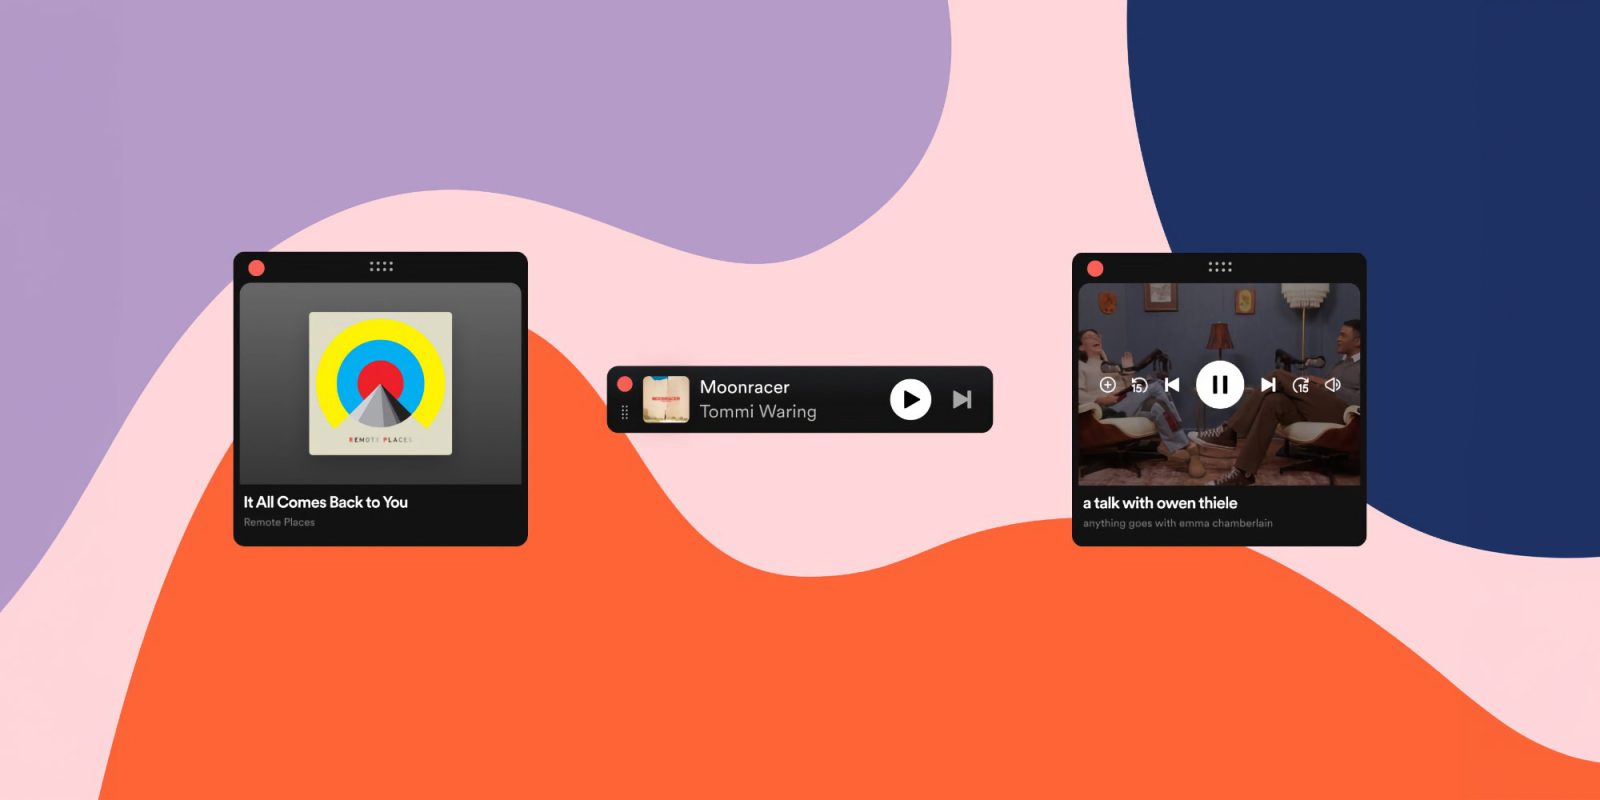 Spotify Premium for Mac and Windows finally adds a miniplayer - 9to5Mac